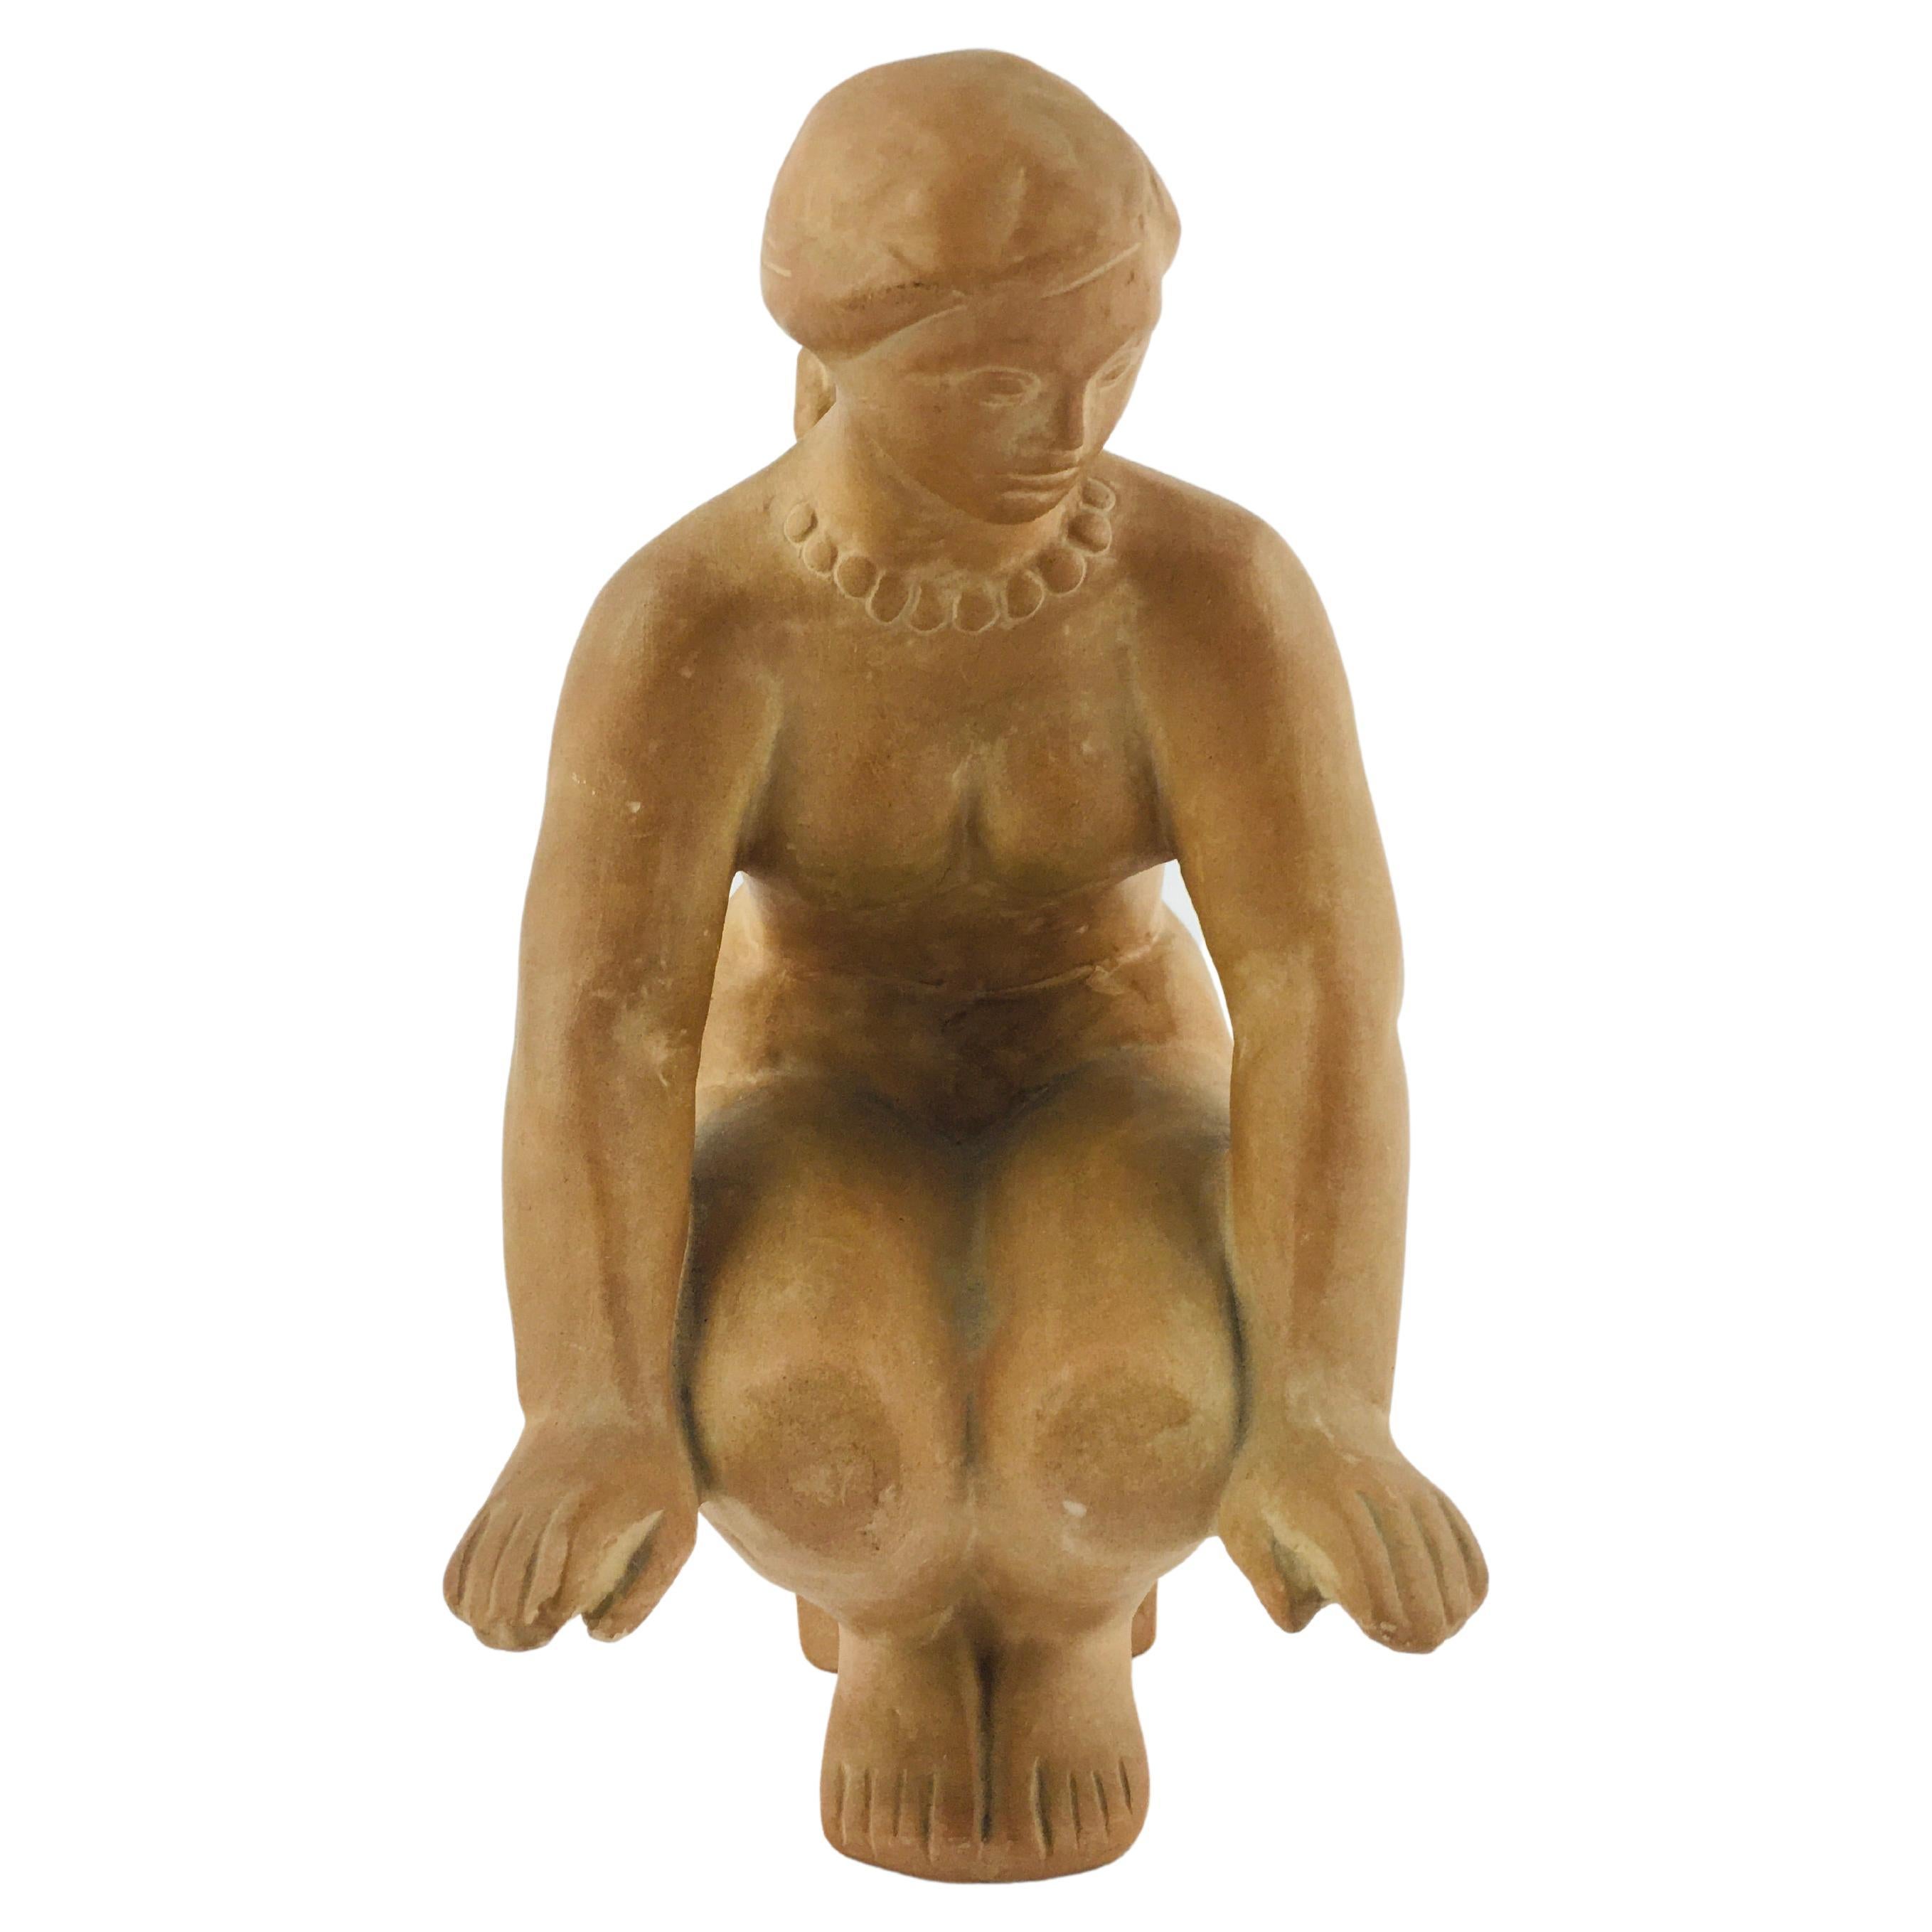  Terracotta Sculpture Female Nude Figure by Árpád Somogyi, Hungary 1970's For Sale